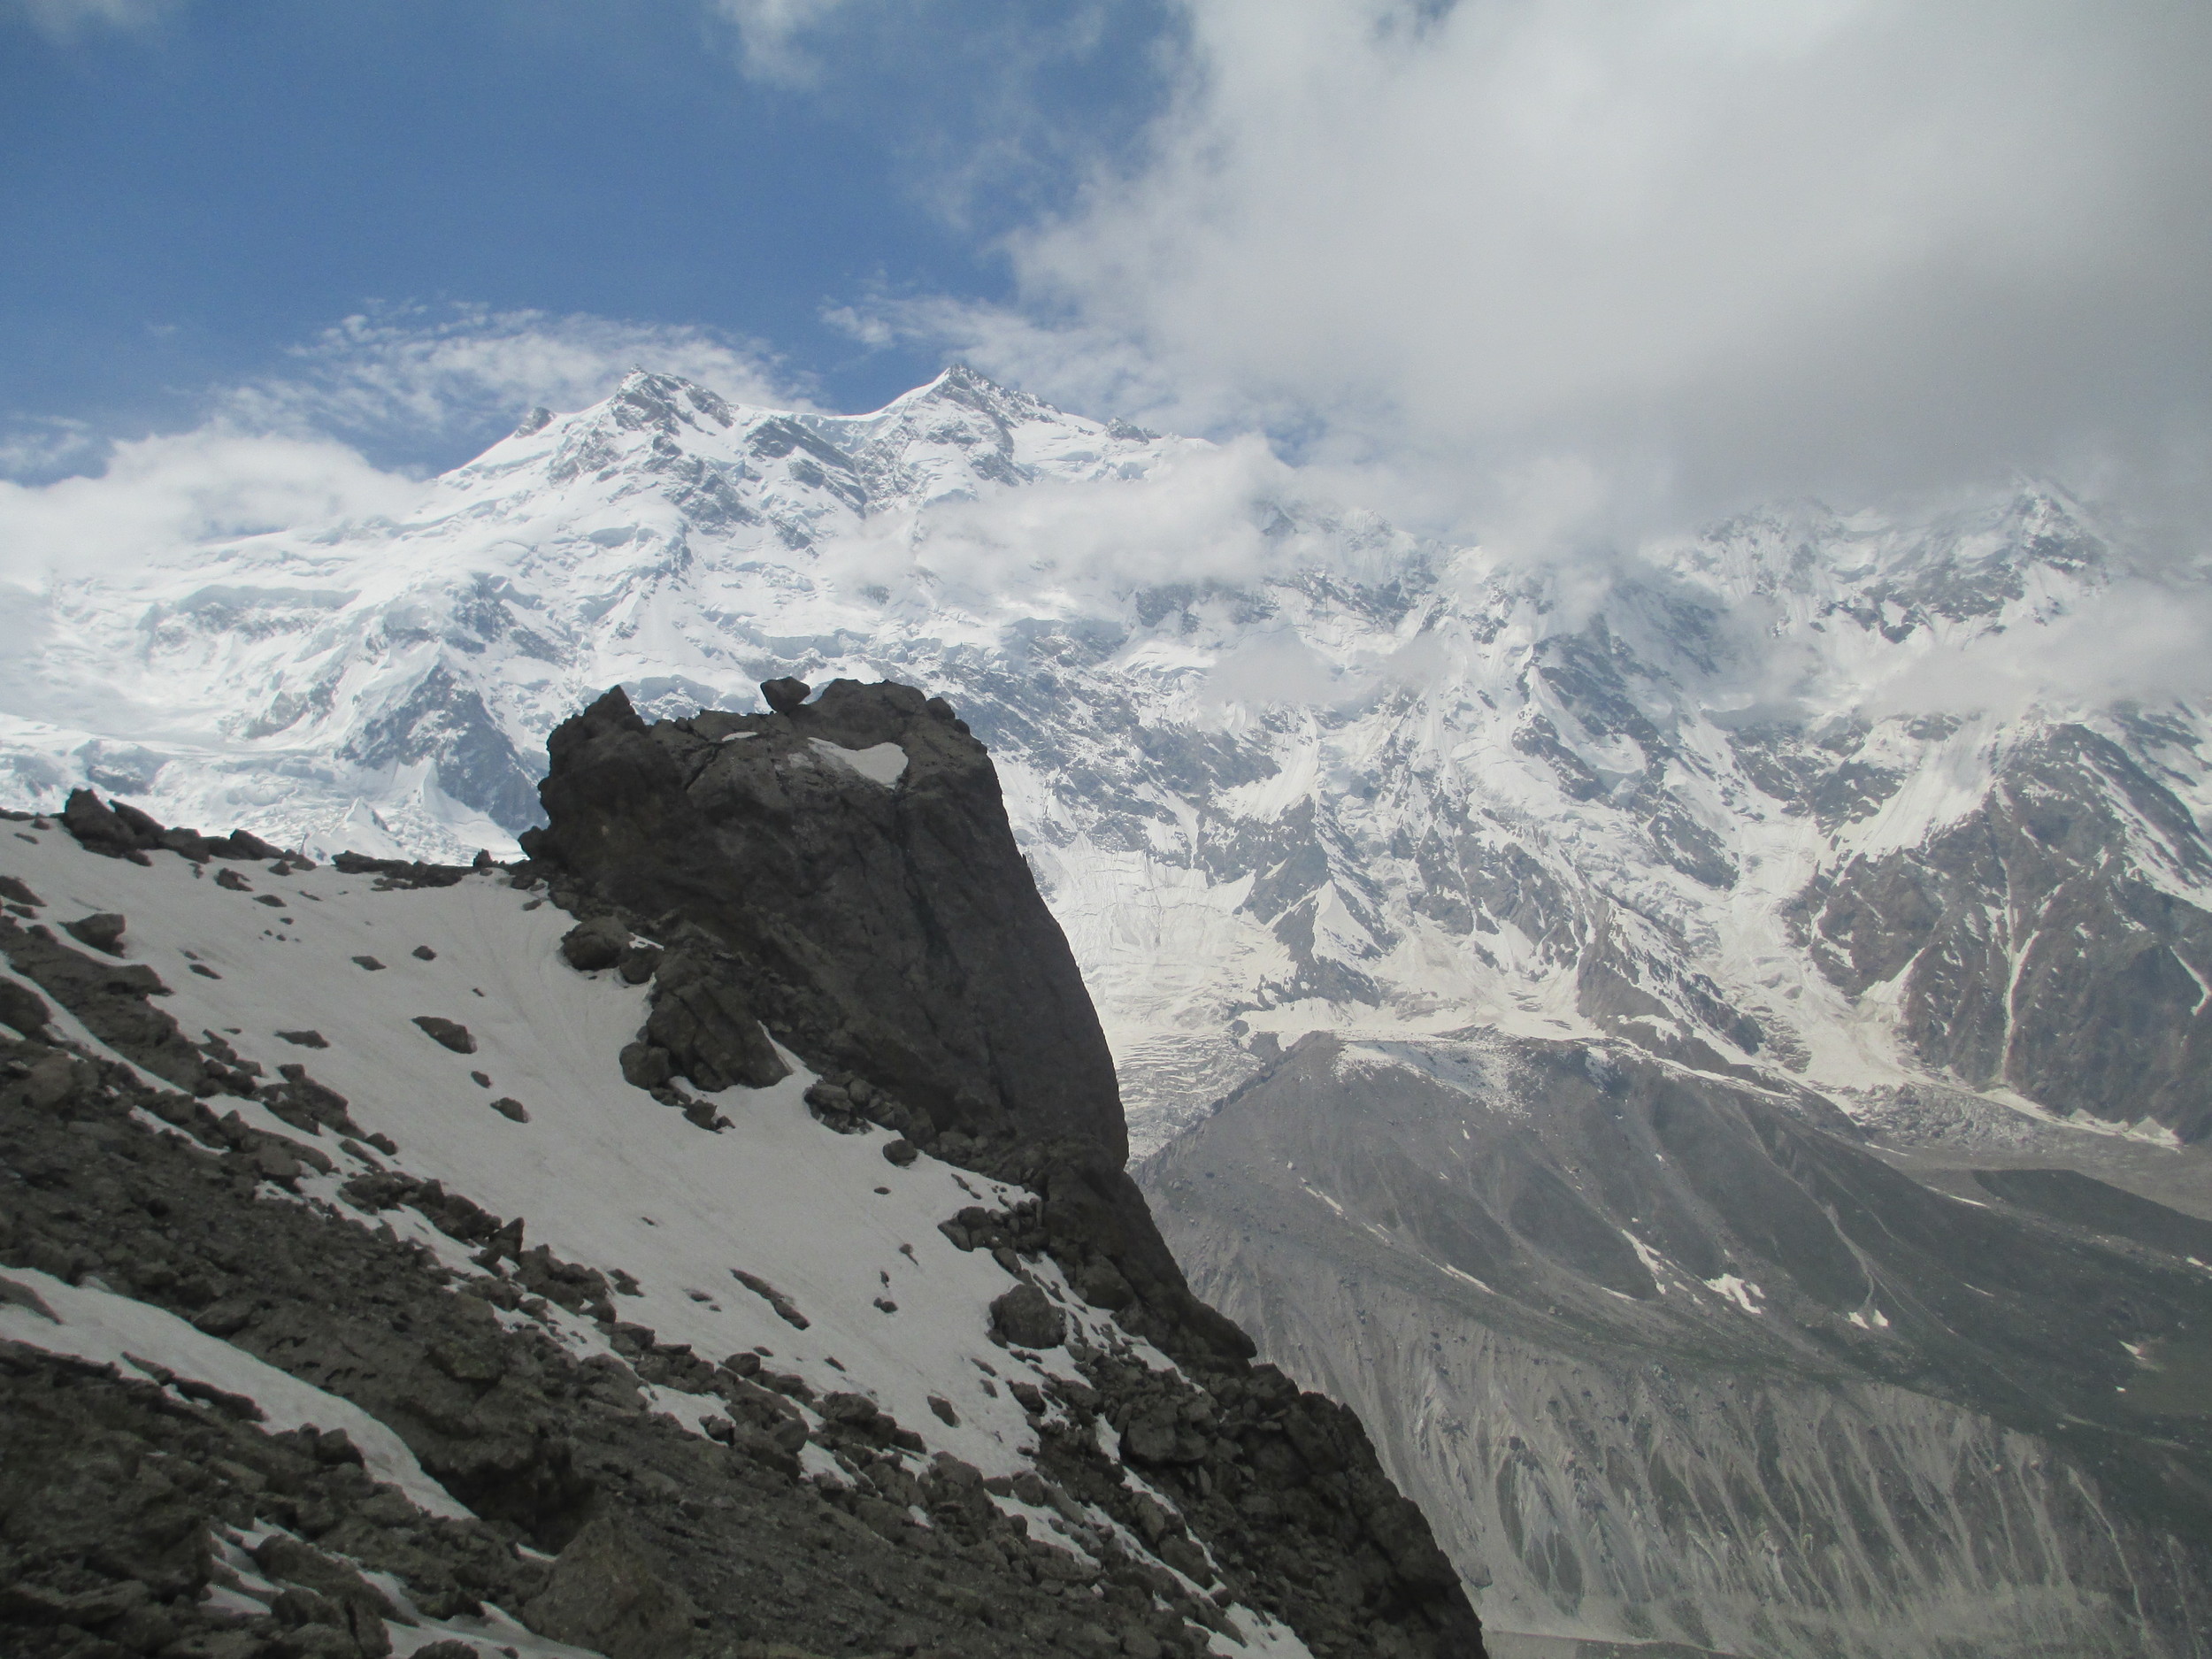     
 
 
      It was the most imposing view I have ever had, when after the descent through fog and moisture we rounded a corner and suddenly the gigantic amphitheatre of the Nanga with her satellites to the east, towering above the Rakhiot glacier 